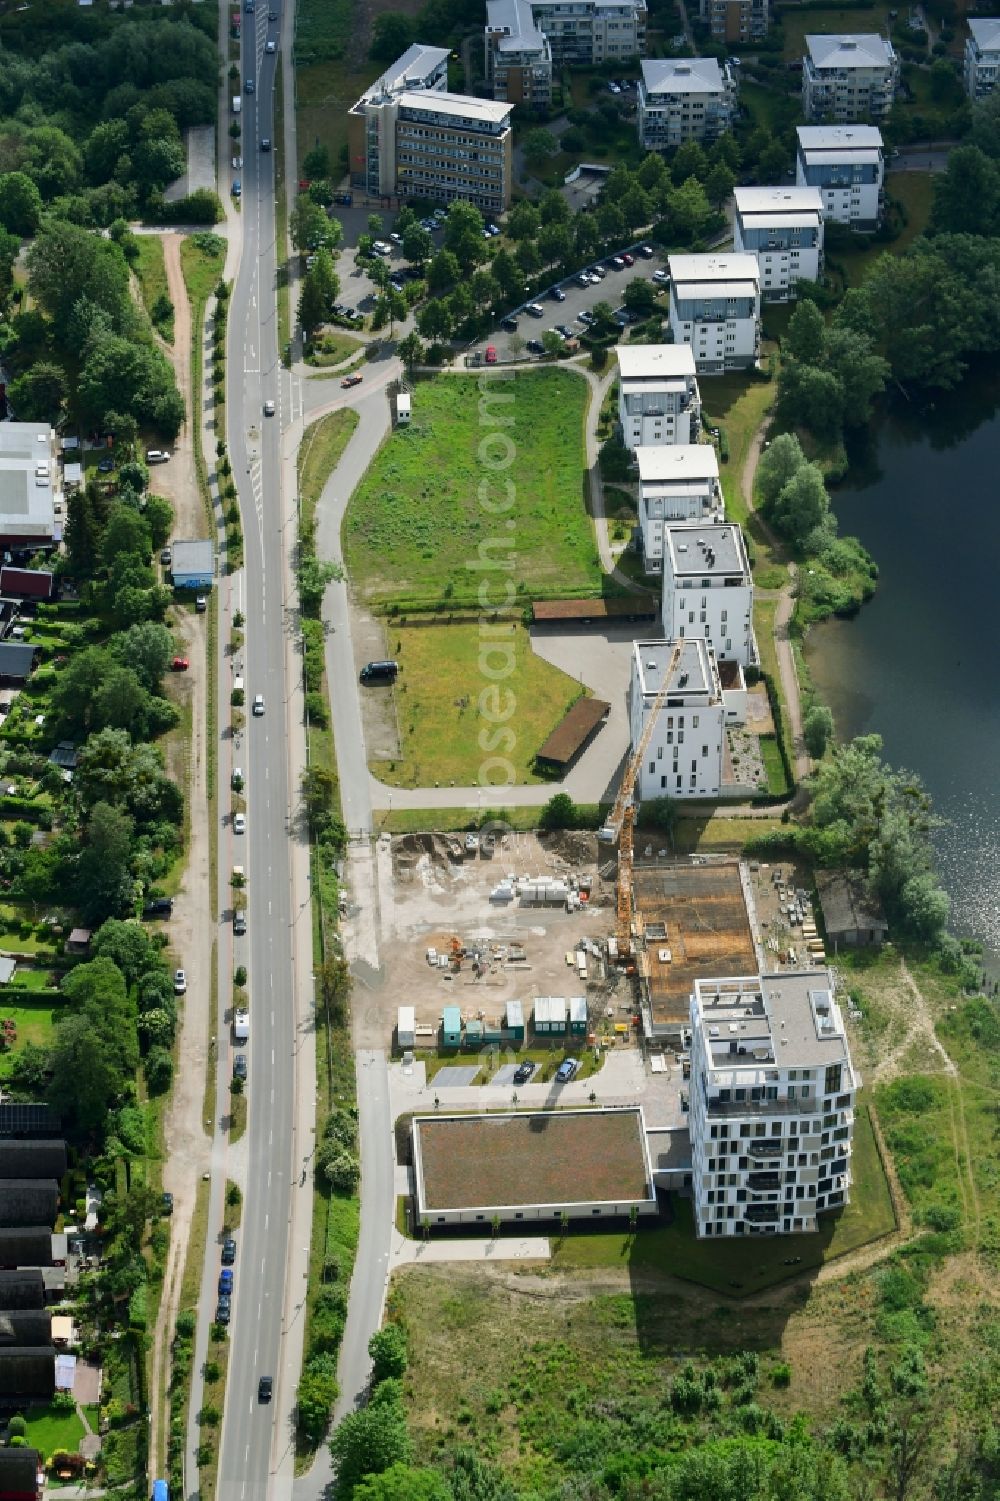 Schwerin from the bird's eye view: Construction site to build a new multi-family residential complex Nordhafenquartier of ineg Immobilien Entwicklungsgesellschaft mbH on Moewenburgstrasse in Schwerin in the state Mecklenburg - Western Pomerania, Germany